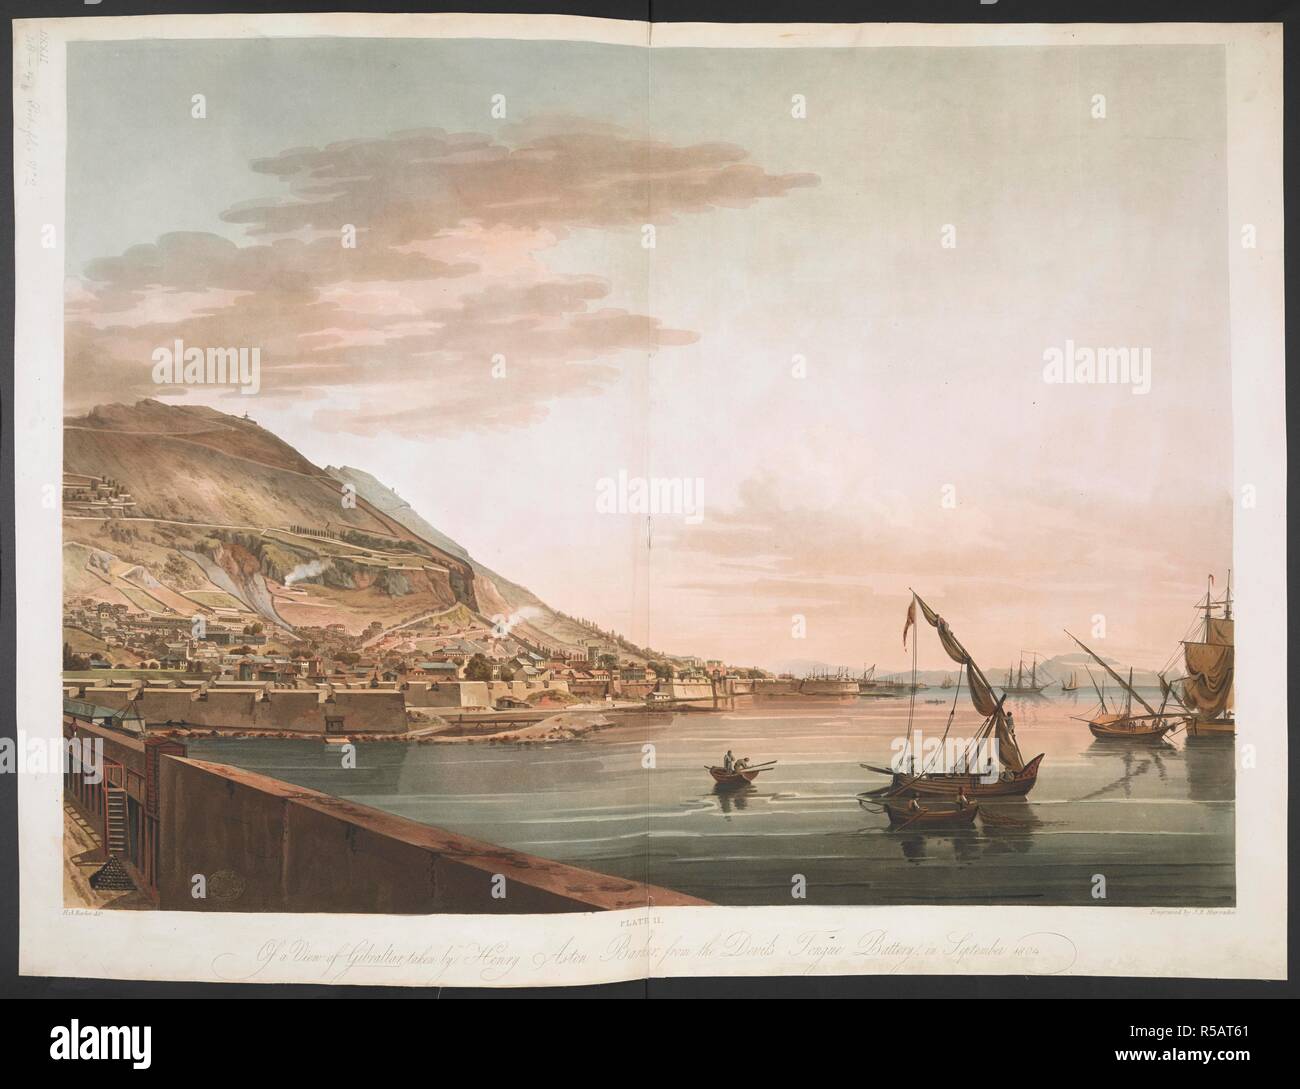 A view of Gibraltar from the south side of the North Mole, with part of the artillery battery and sailing ships in the foreground, city walls, town and harbour beyond and the Spanish coast in the background. Plate II. Of a View of Gibraltar by Henry Aston Barker : from the Devil's Tongue Battery, in September 1804. [London] : [publisher not identified], [1808]. Etching and aquatint. Source: Maps K.Top.72.48.n.2. Language: English. Author: Harraden, Richard. Stock Photo